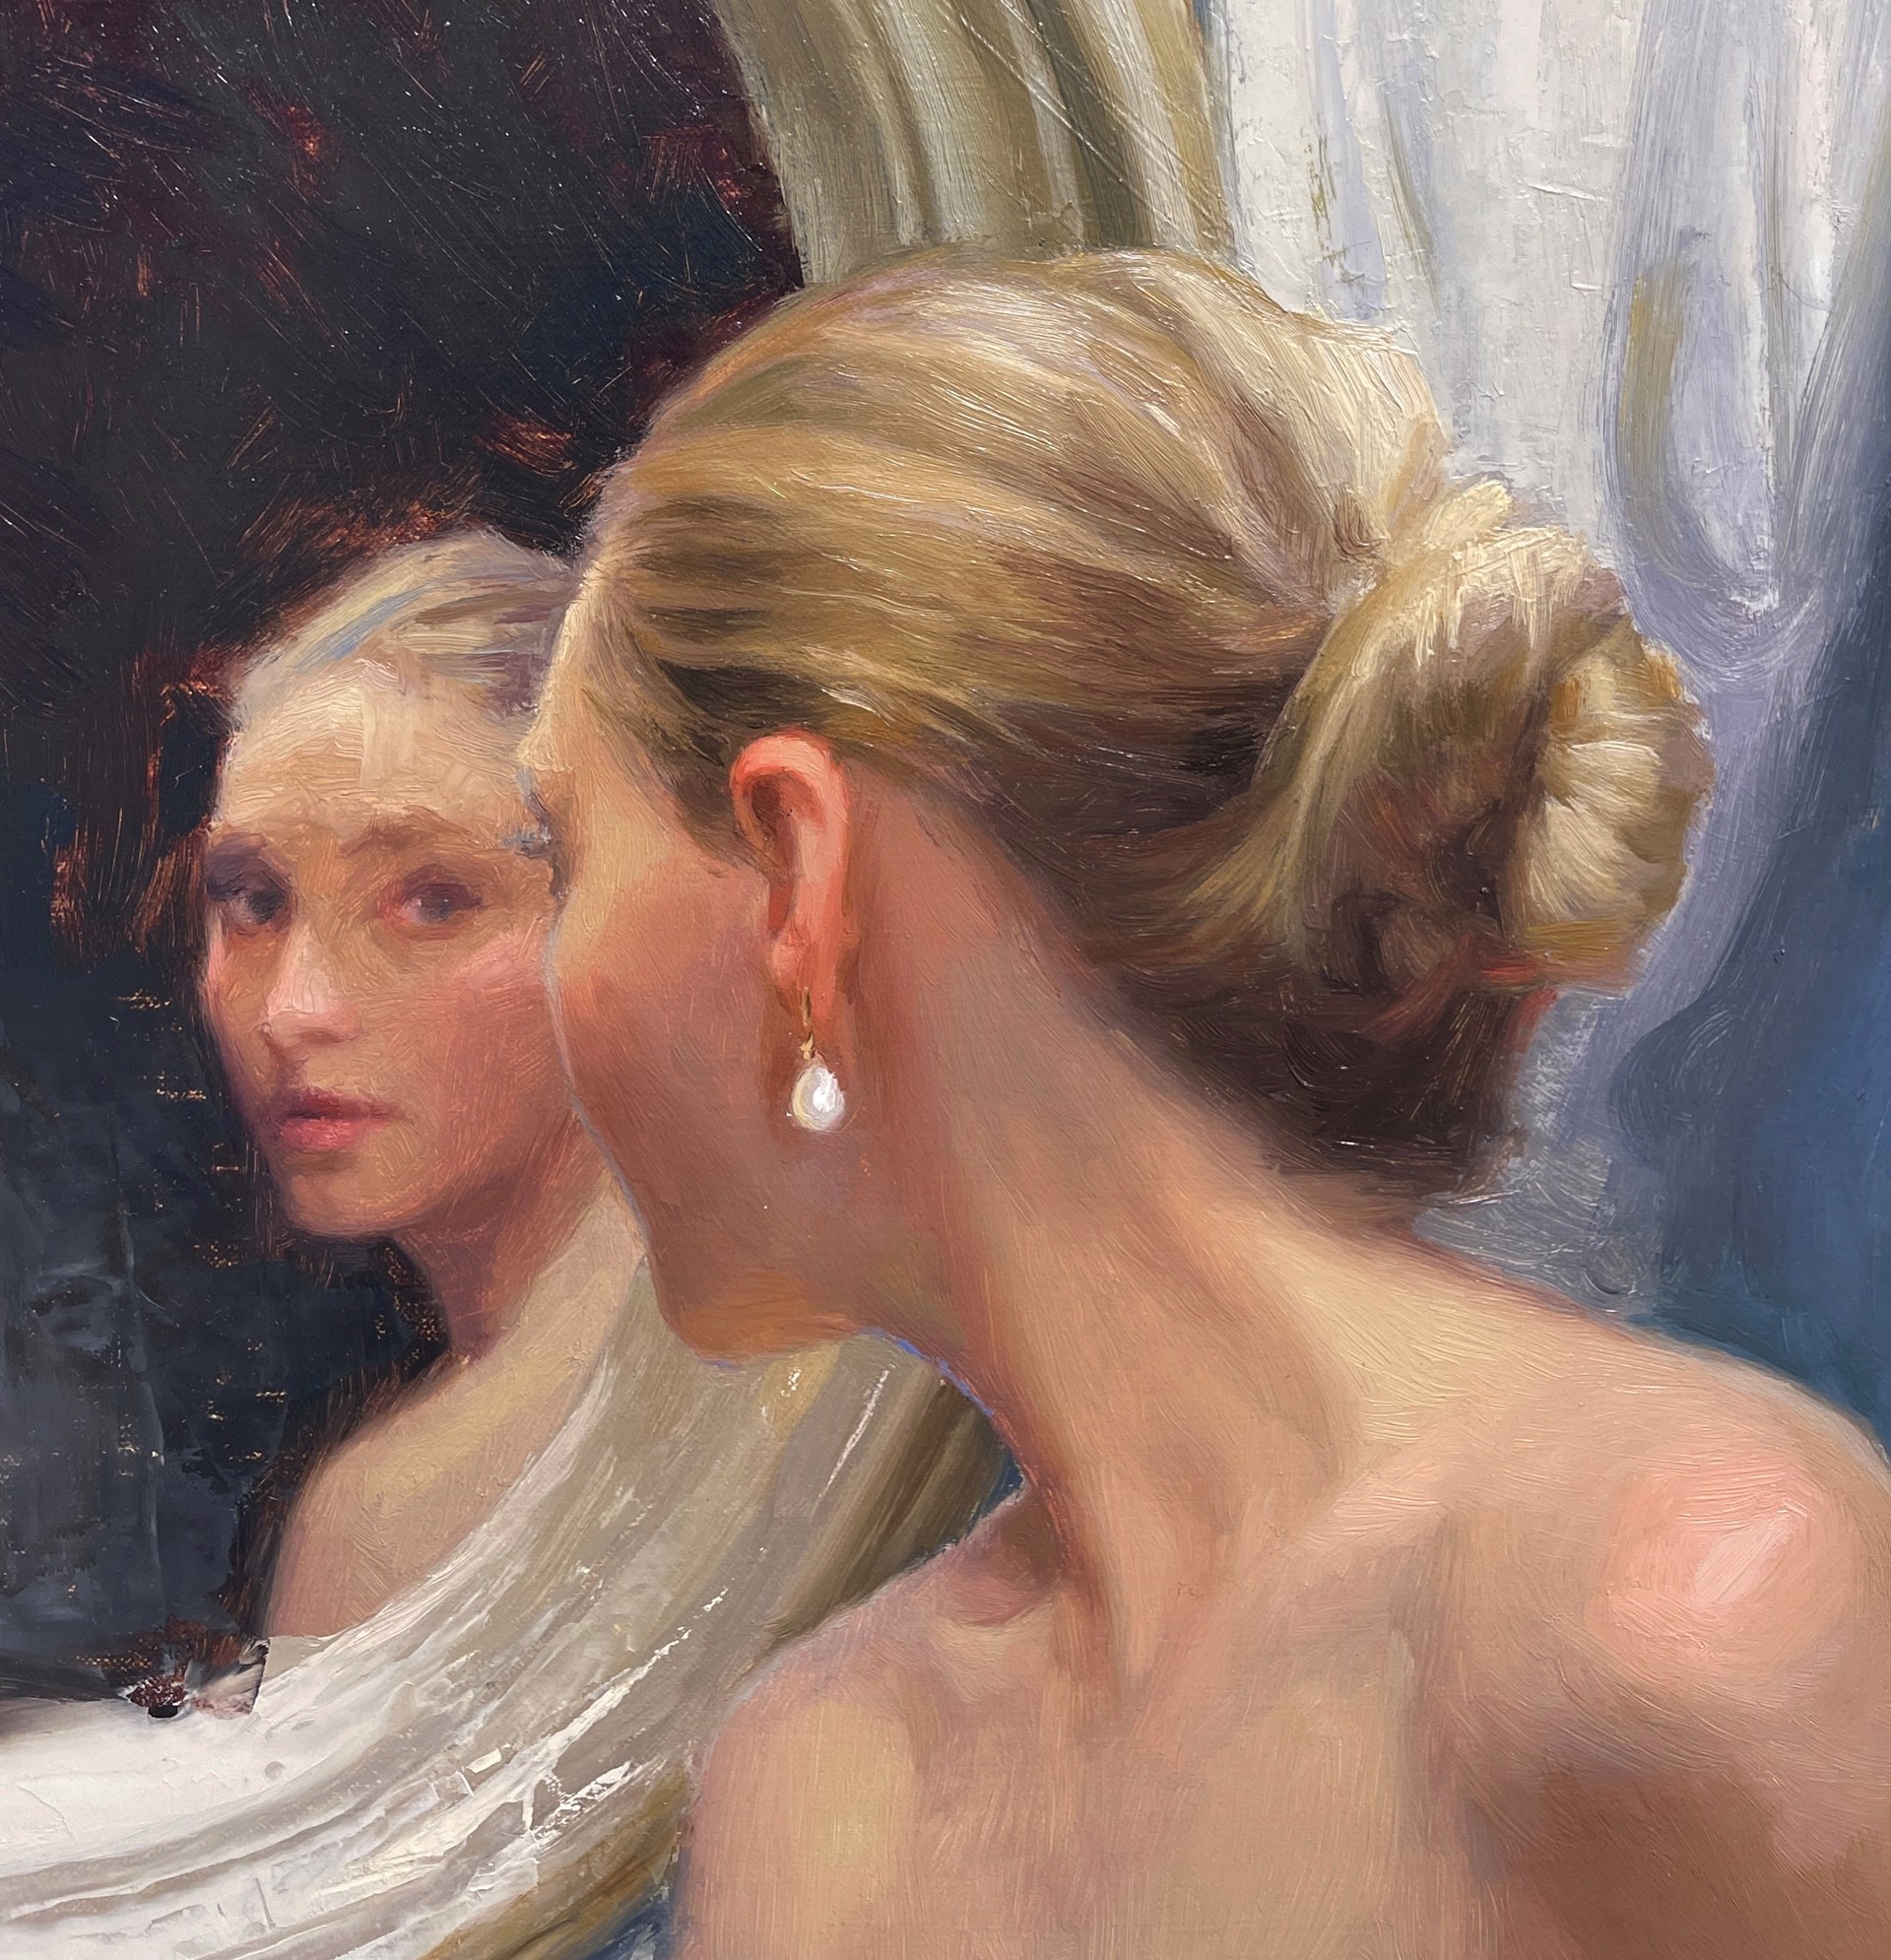 Reflection by Casey Childs